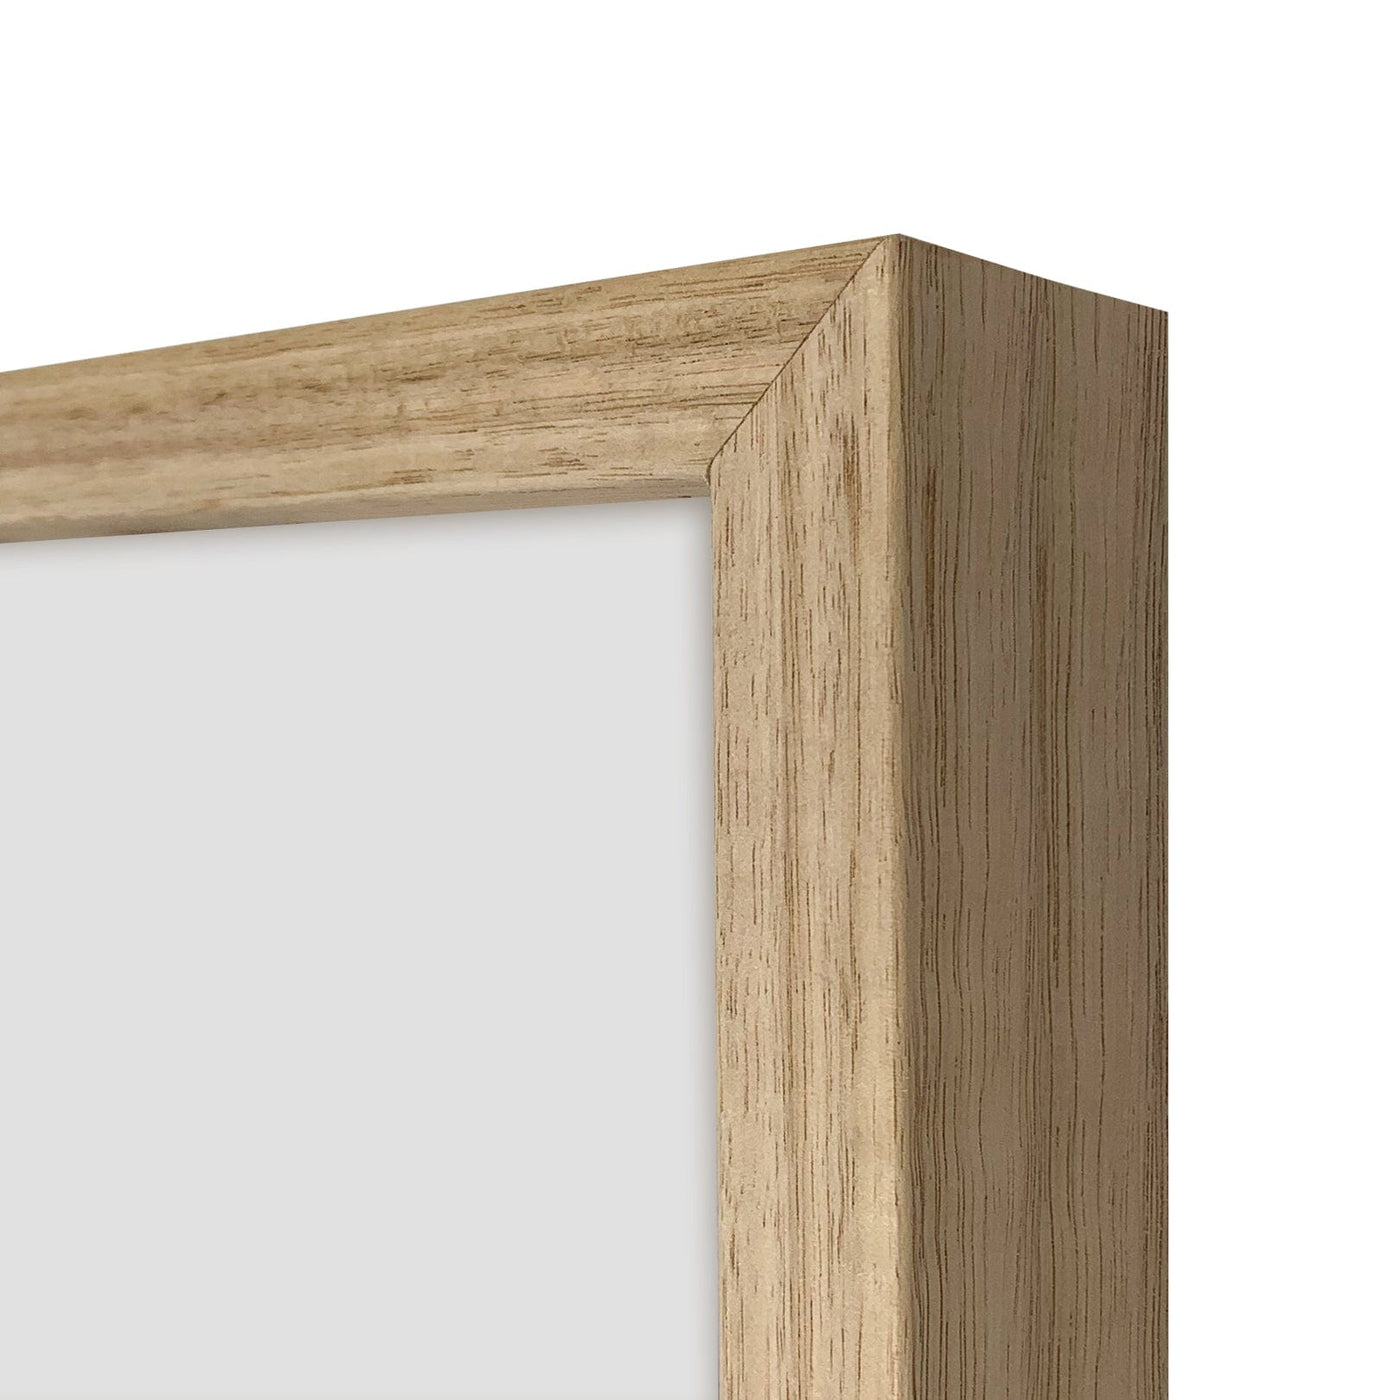 Gallery Style Victorian Ash Natural Oak A1 Box Picture Frame to suit A2 image from our Australian Made A1 Picture Frames collection by Profile Products Australia